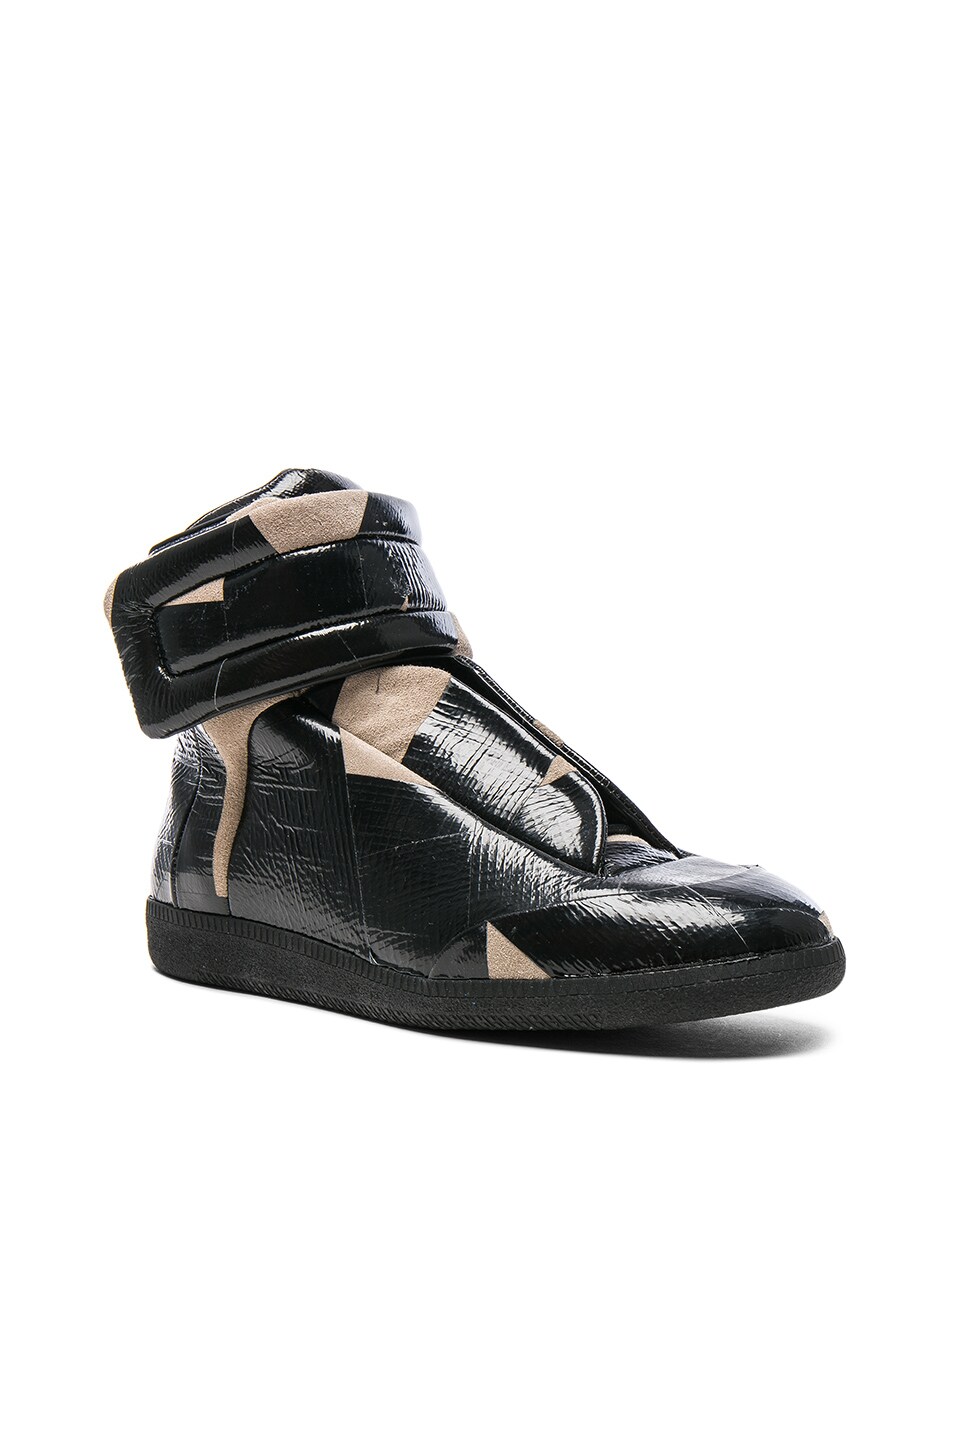 Image 1 of Maison Margiela Future High Top Sneakers in Flesh & Black